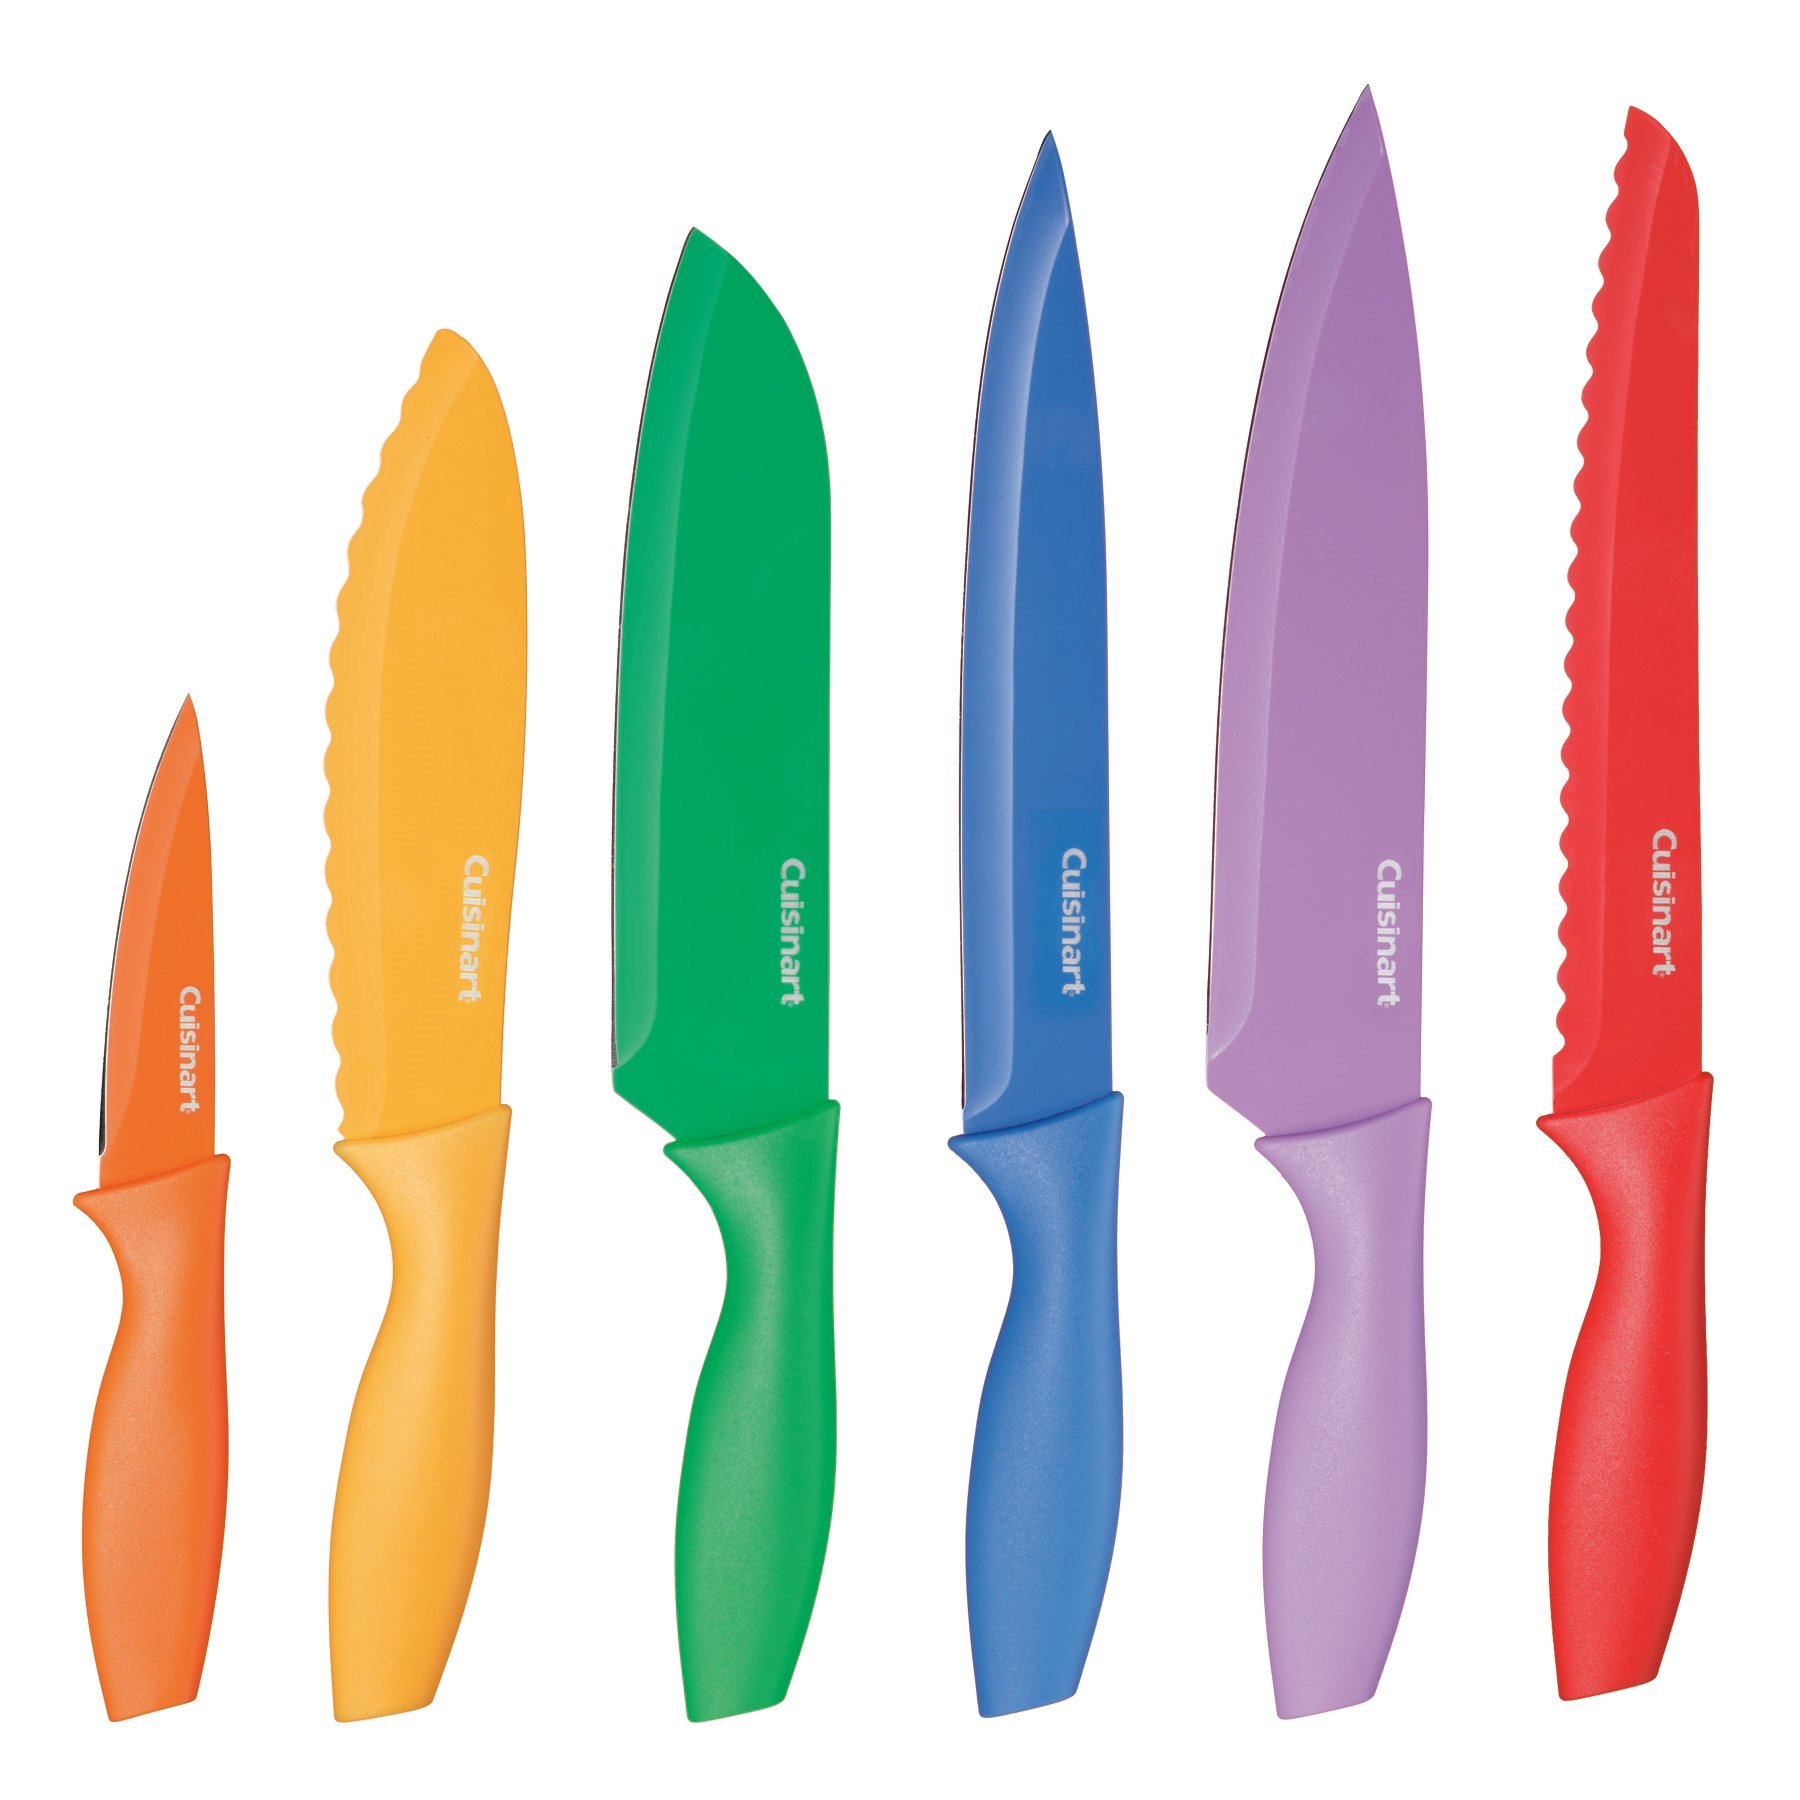 12 Piece Nonstick Color Knife Set with Blade Guards